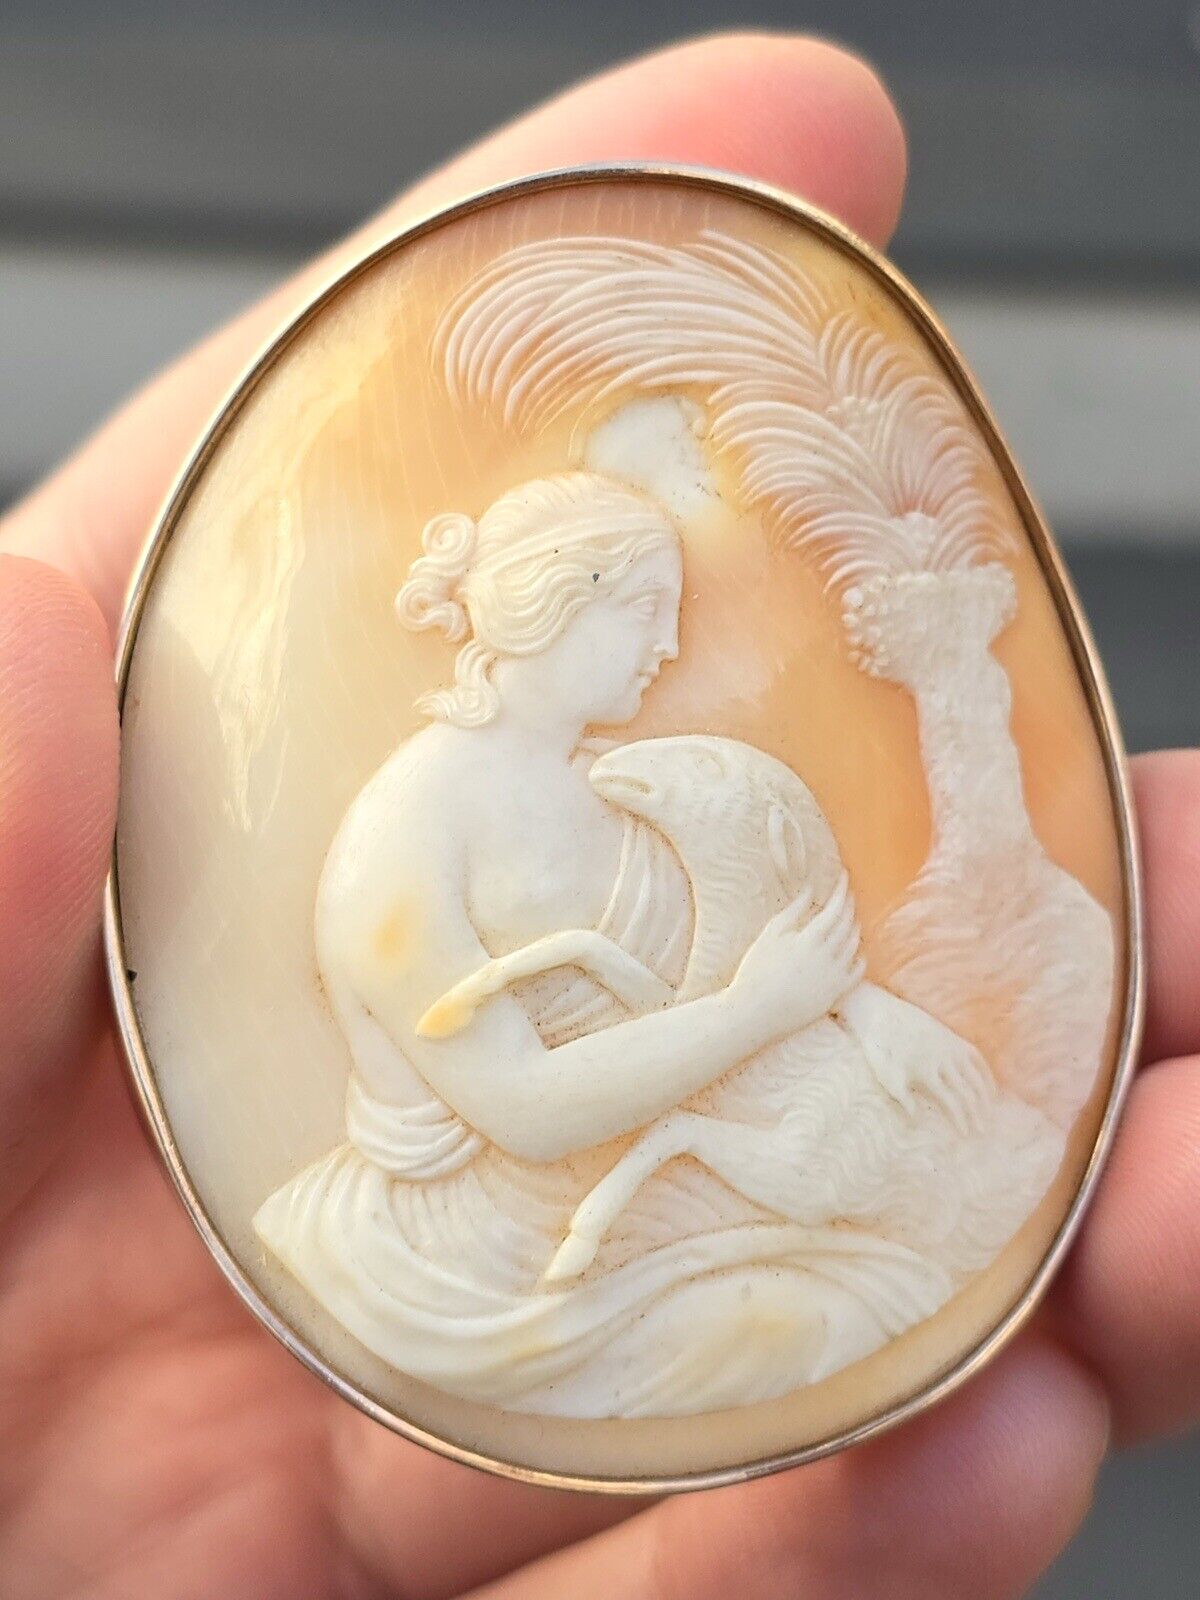 Exceptional Quality 14K Yellow Gold Cameo Brooch With Superb Carving